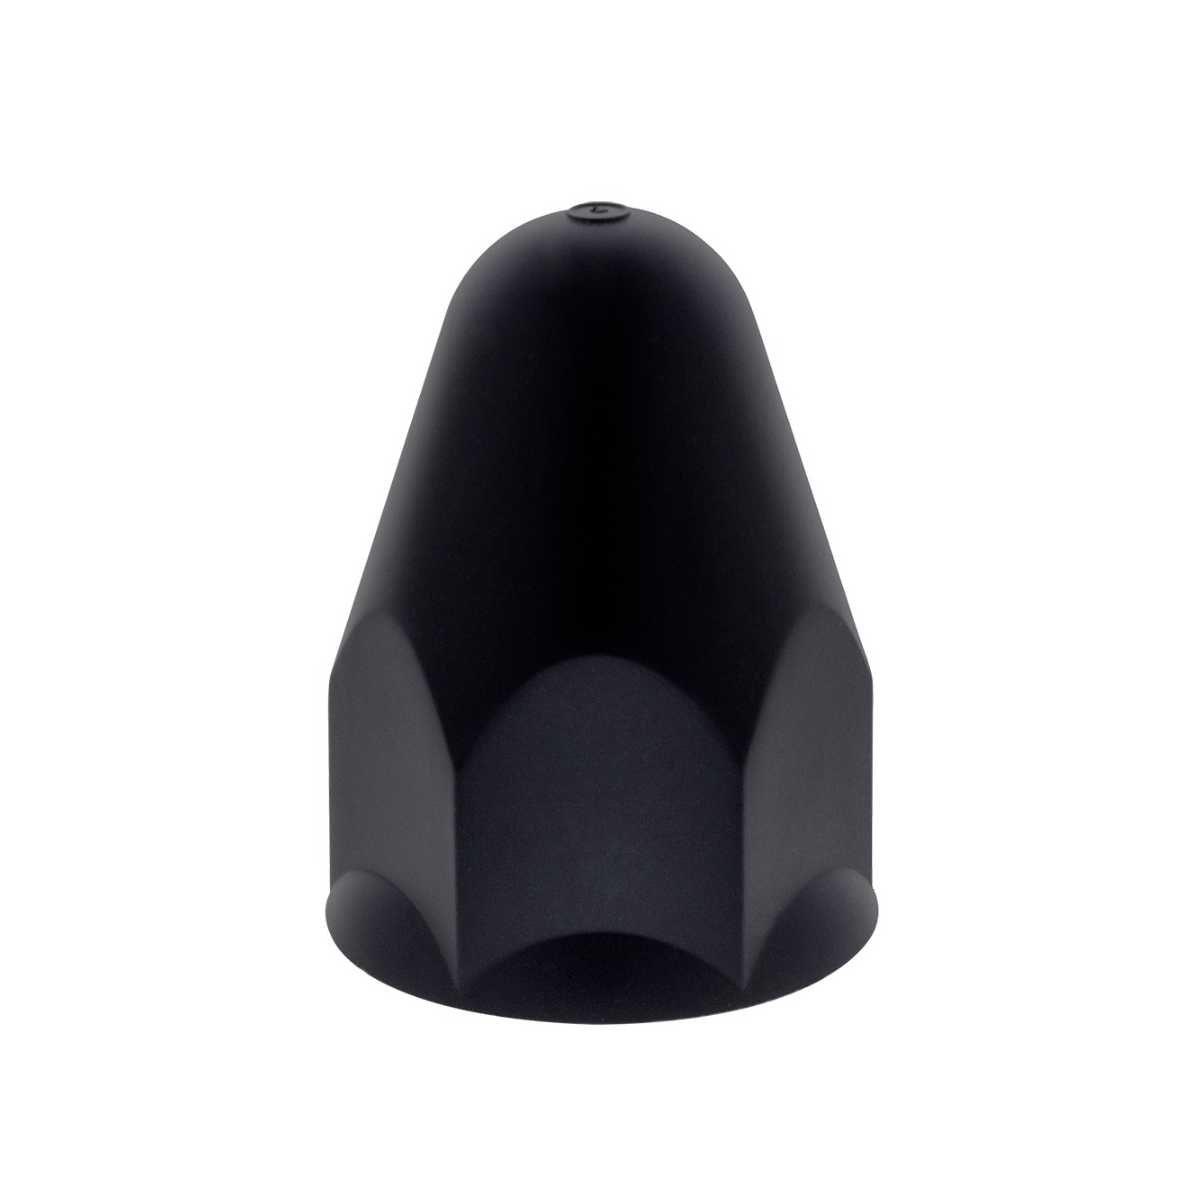 1-1/2 Inch X 2-3/4 Inch Height Matte Black Painted Plastic Bullet Lug Nut Covers - Push-On